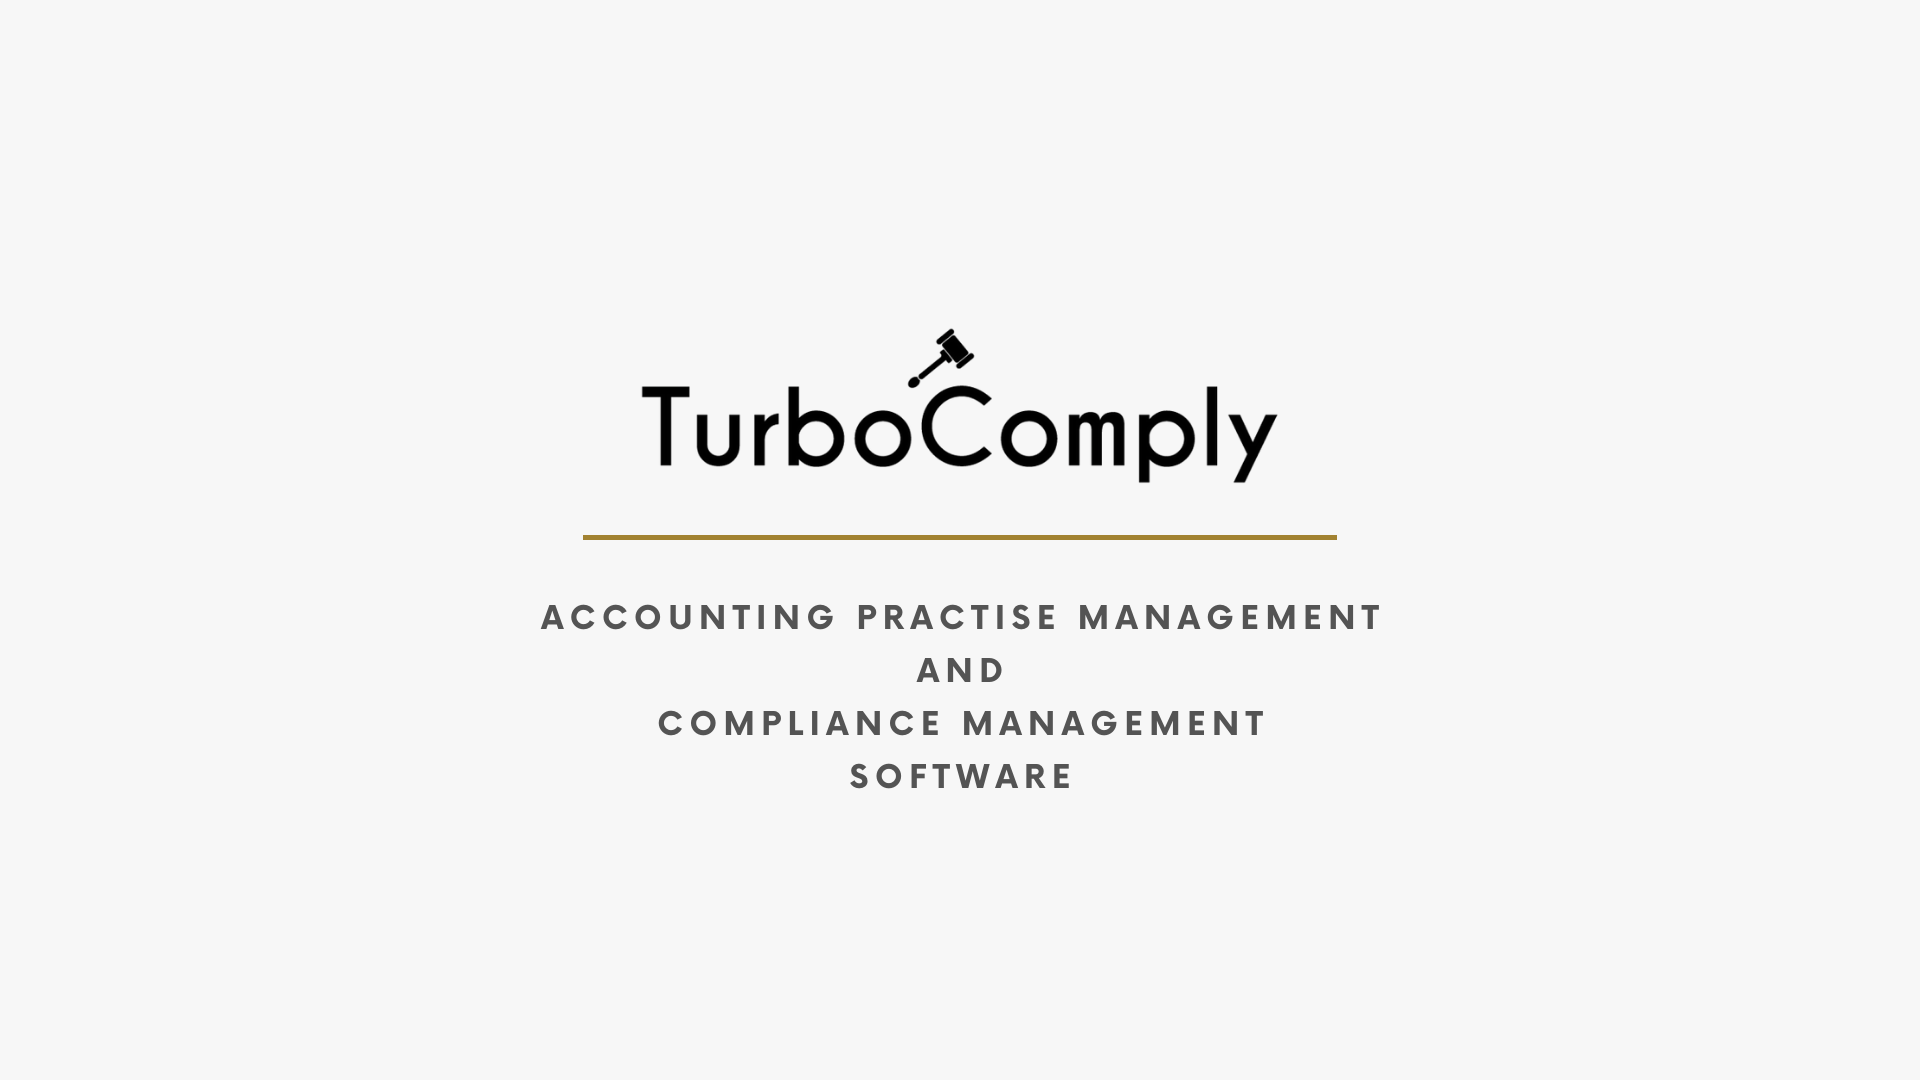 Why ” Turbocomply ” Practice Management ?